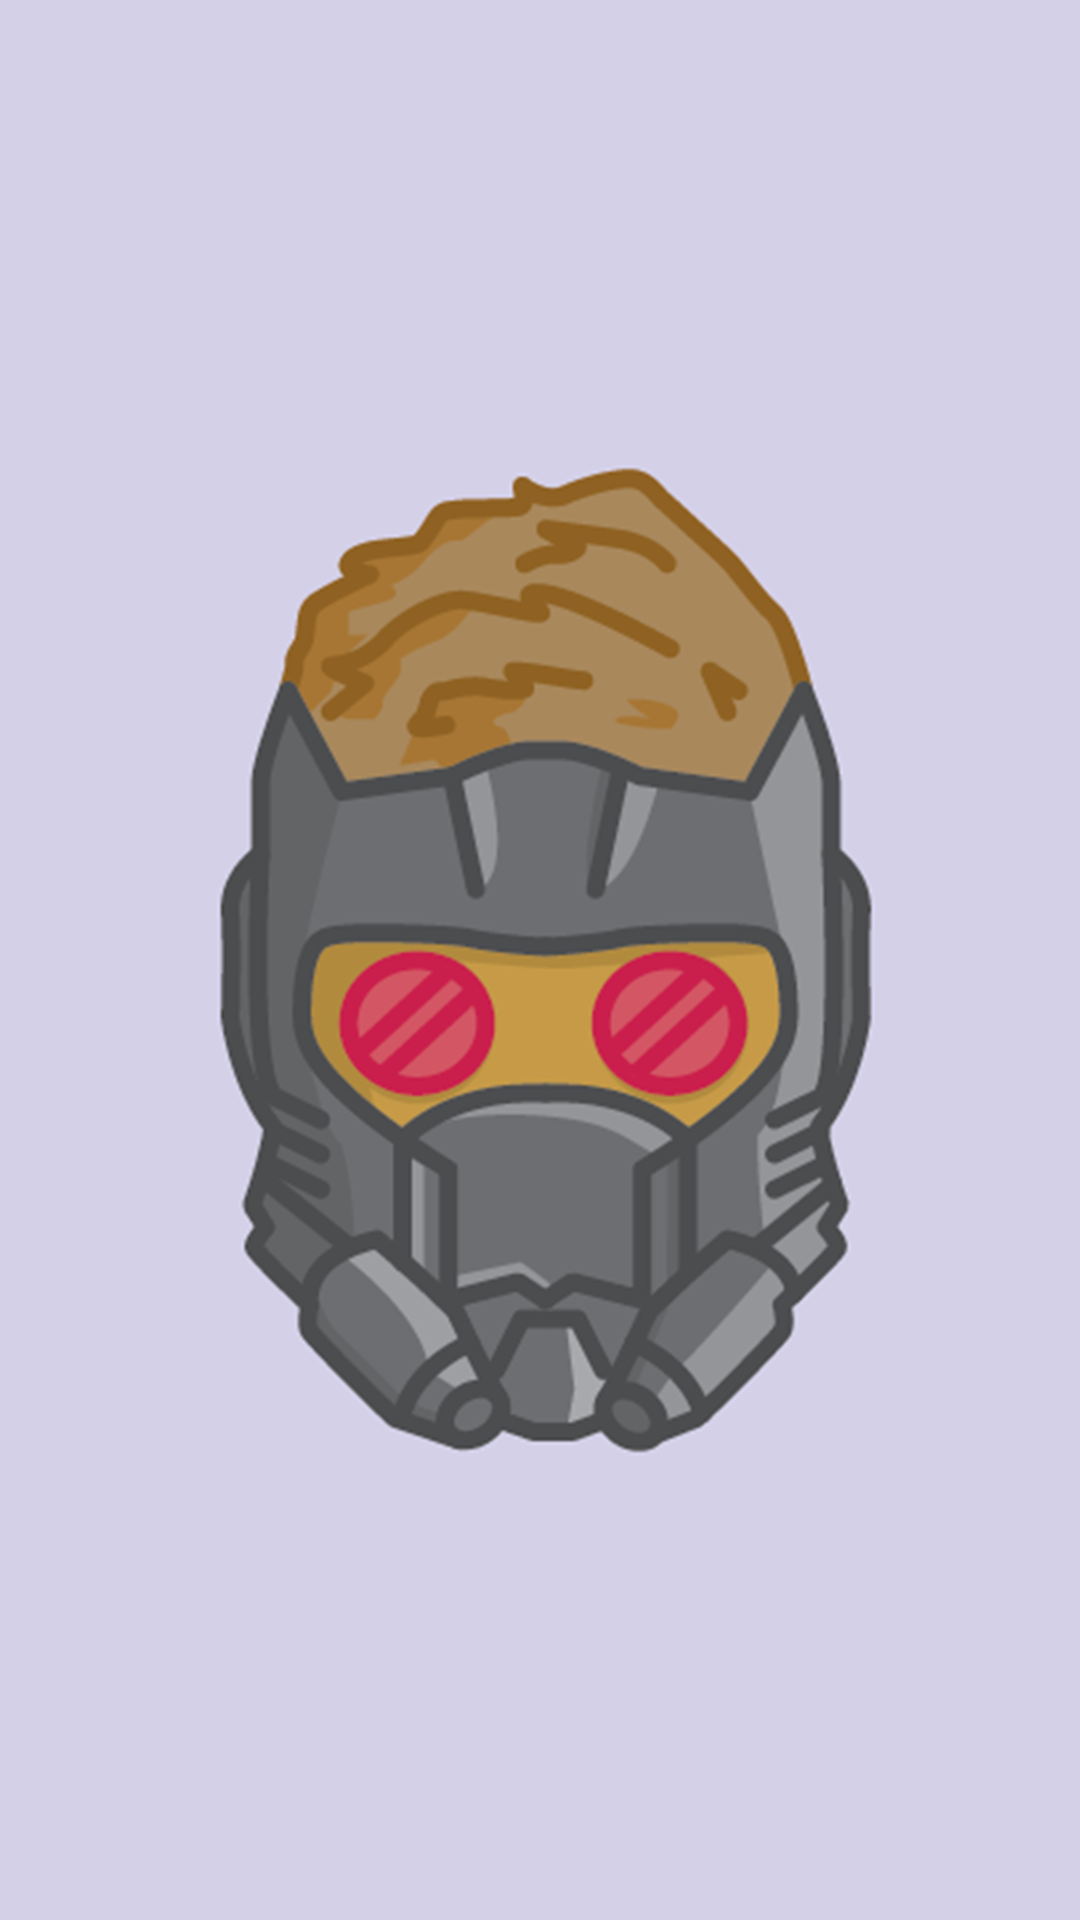 General 1080x1920 Star-Lord simple background artwork Guardians of the Galaxy comic art minimalism